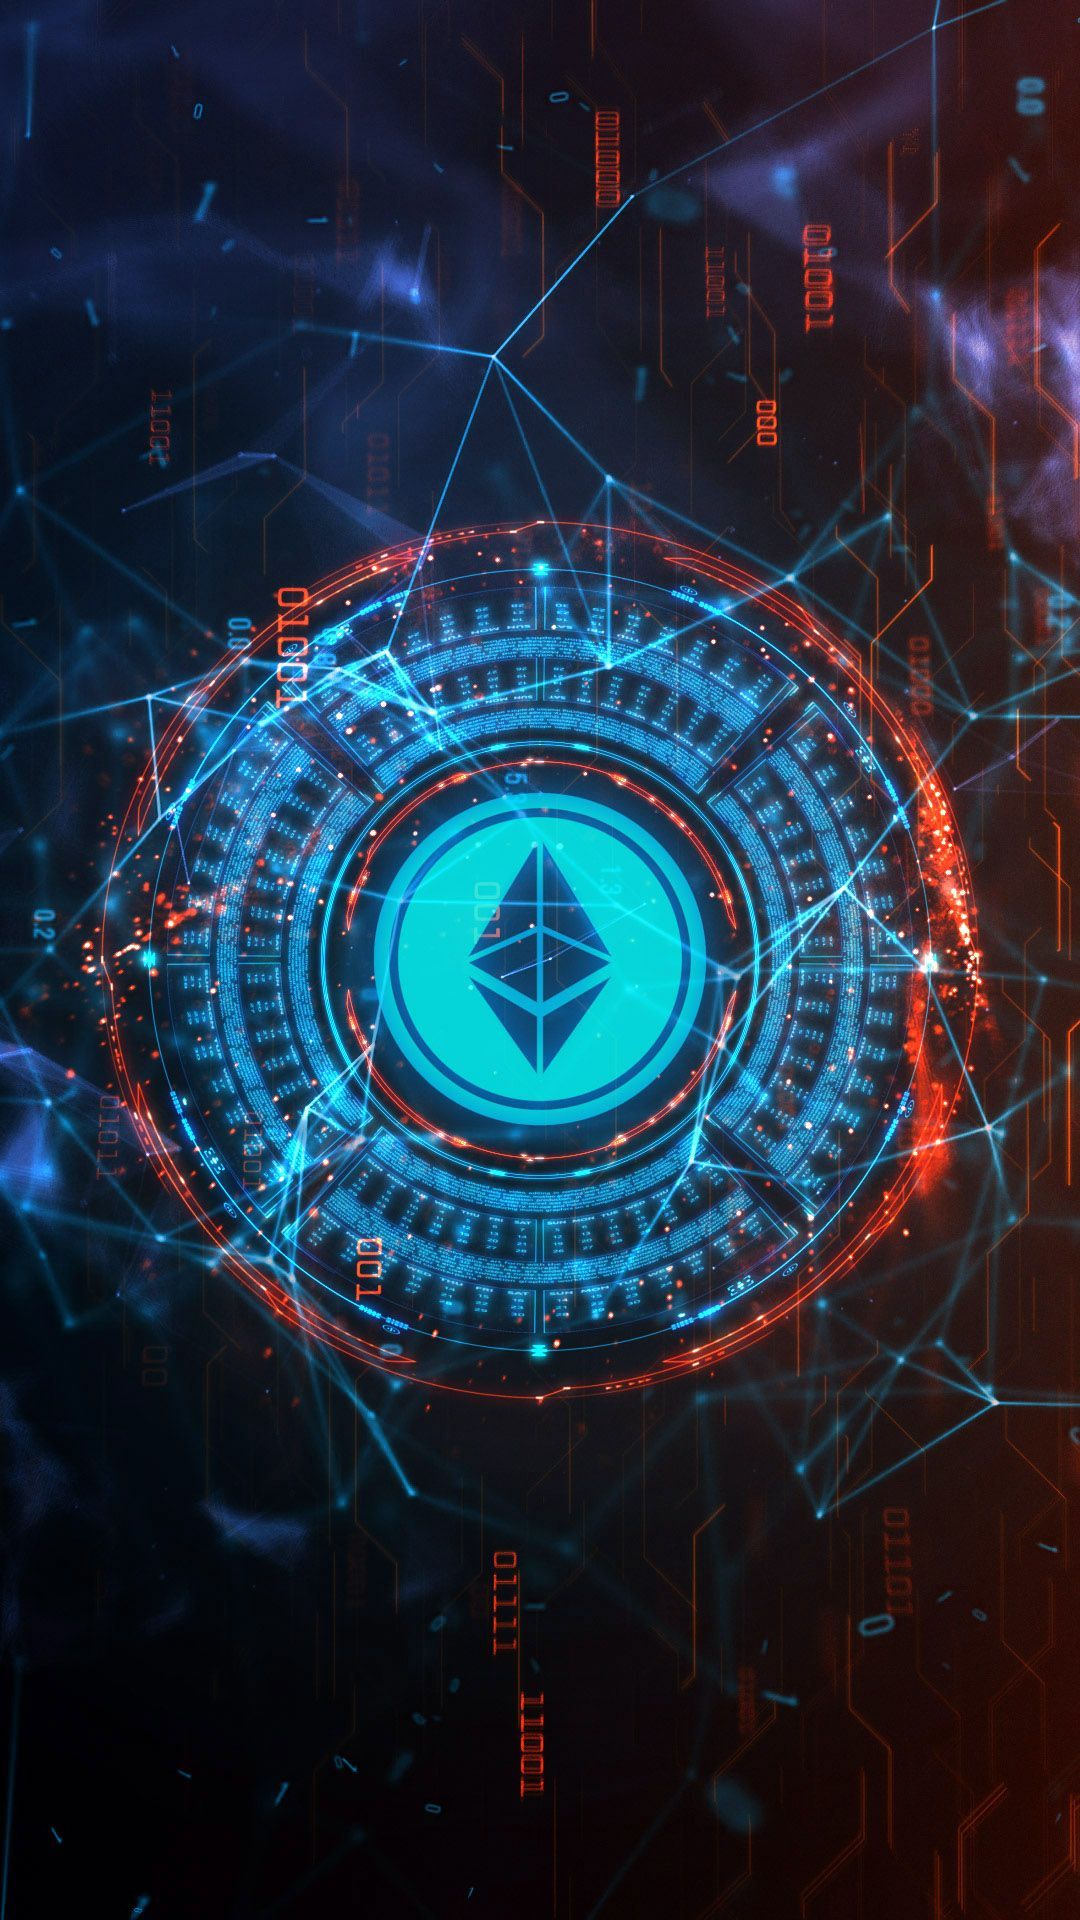 Ethereum Background. Live wallpaper iphone, Technology wallpaper, iPhone wallpaper vintage